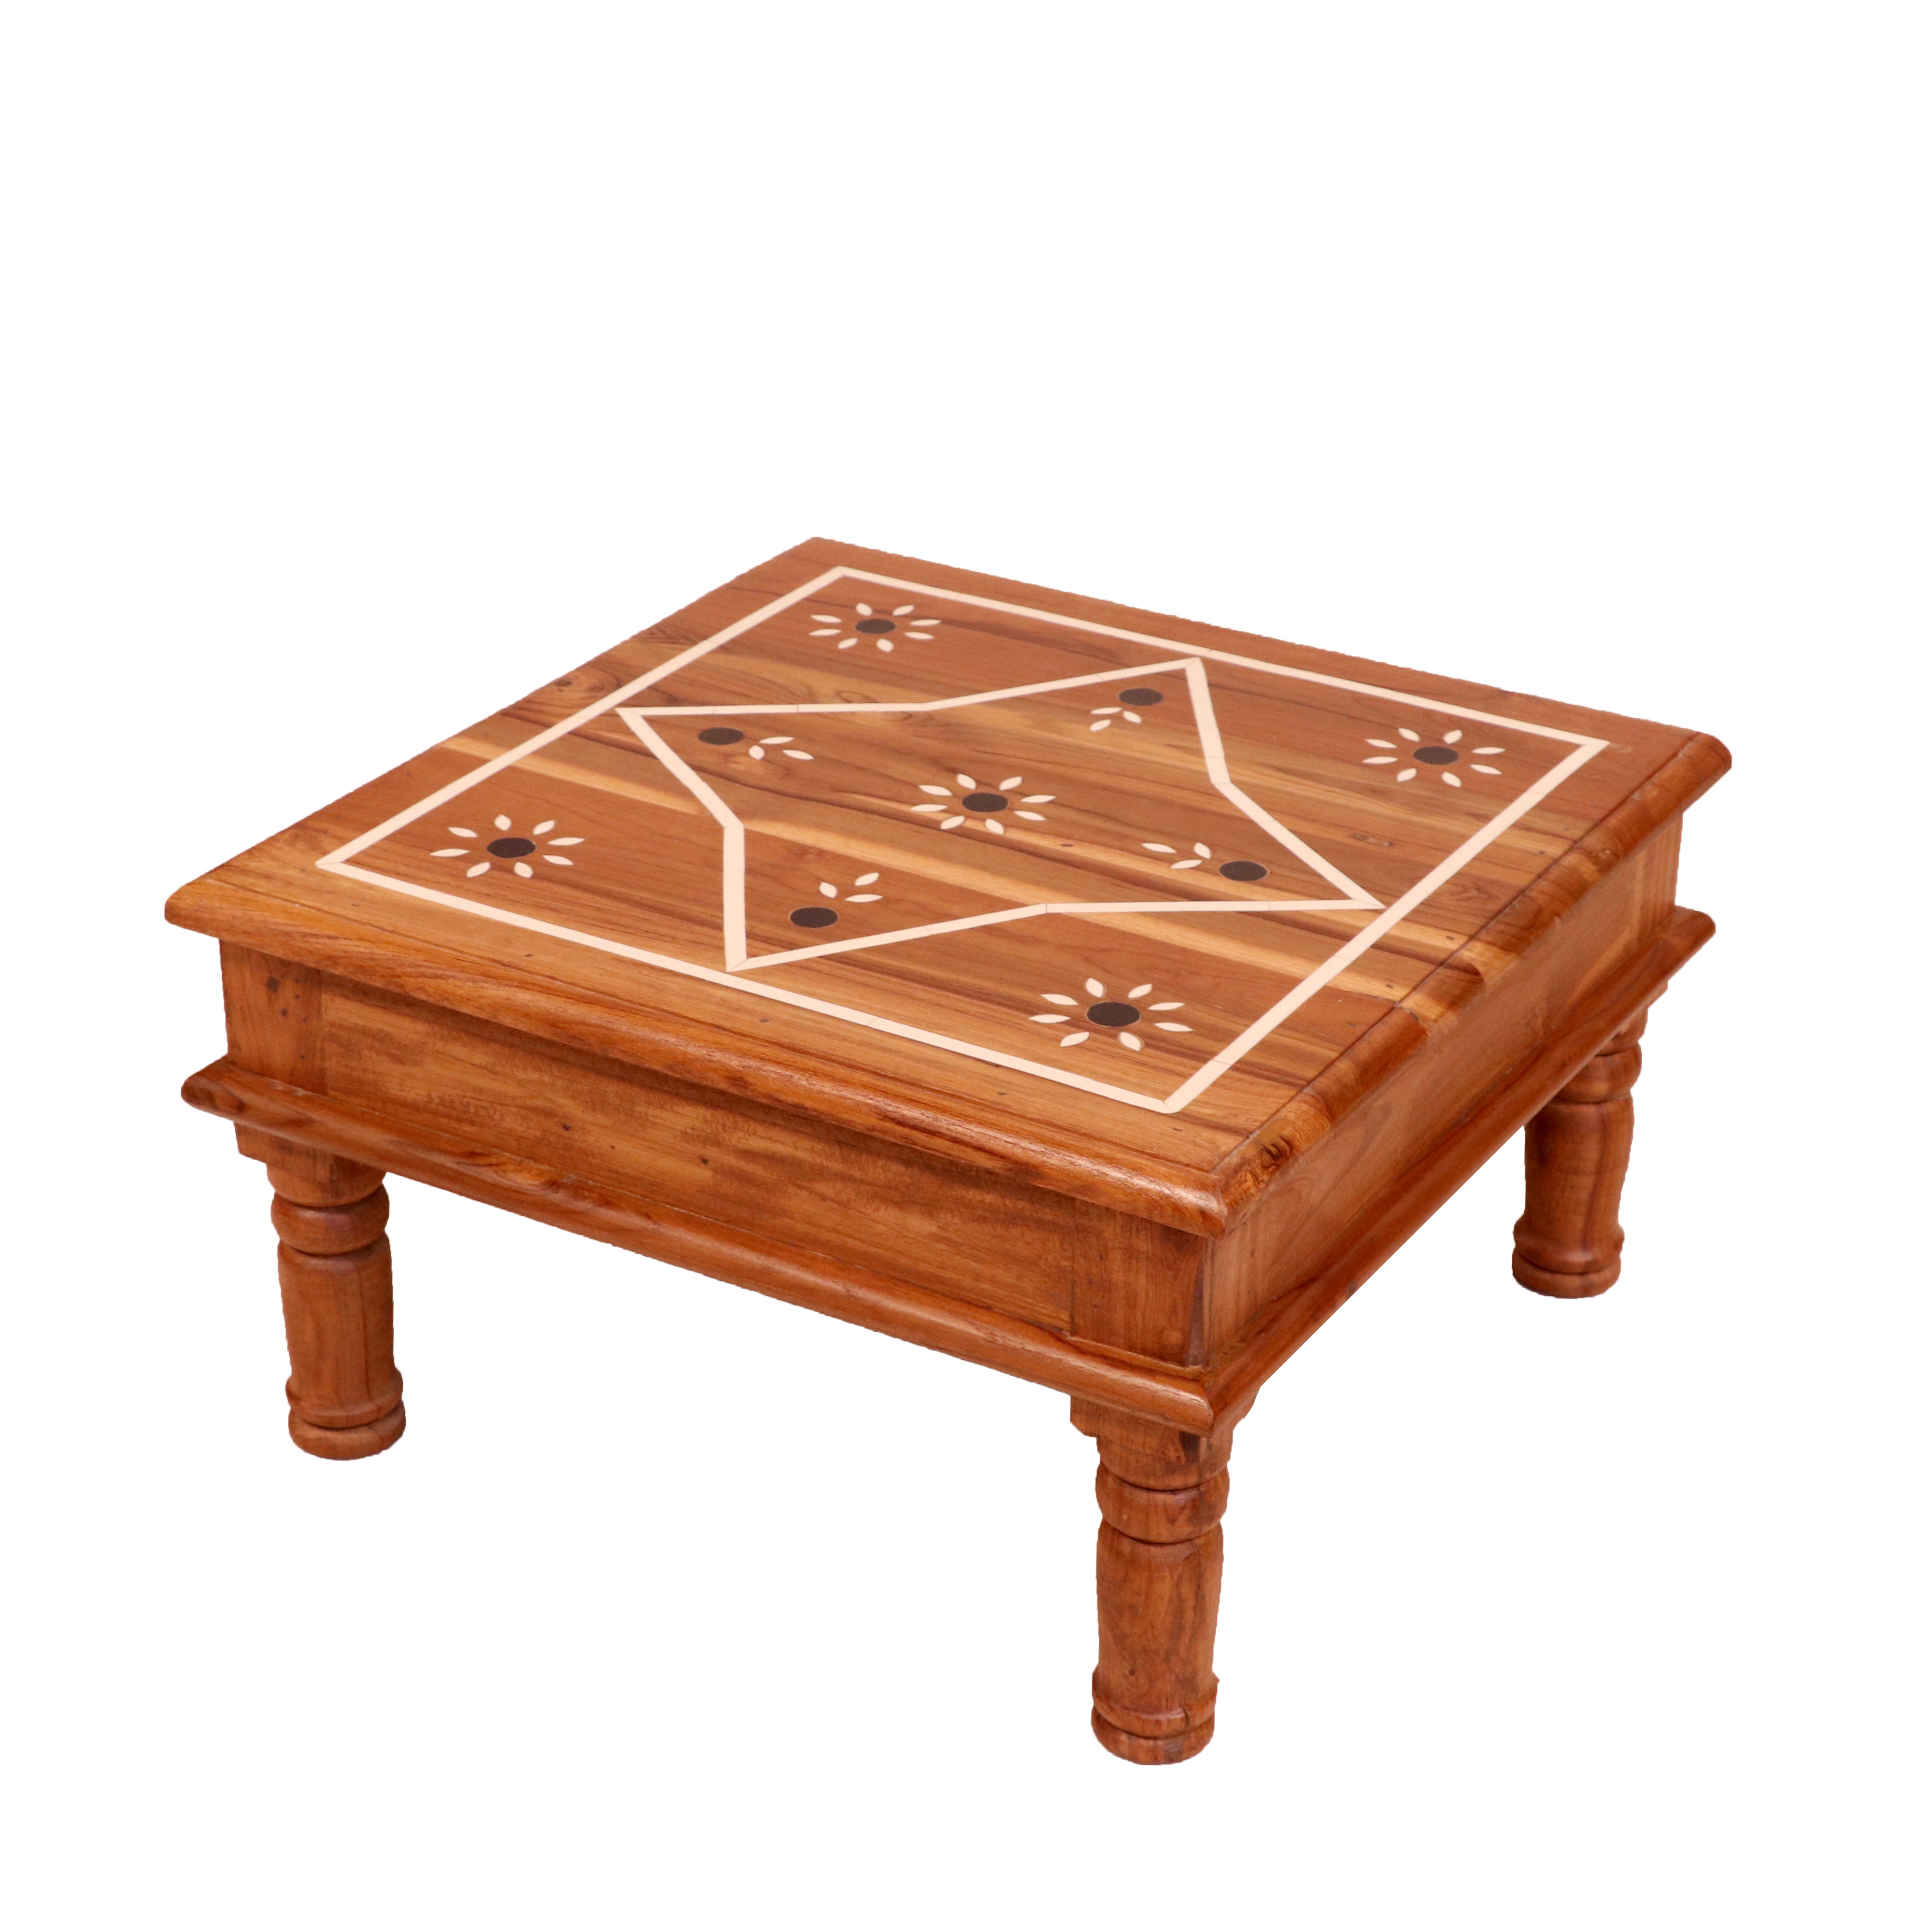 Natural Mankind Style Inlay Designed Handmade Wooden Bajot for Home Bajot